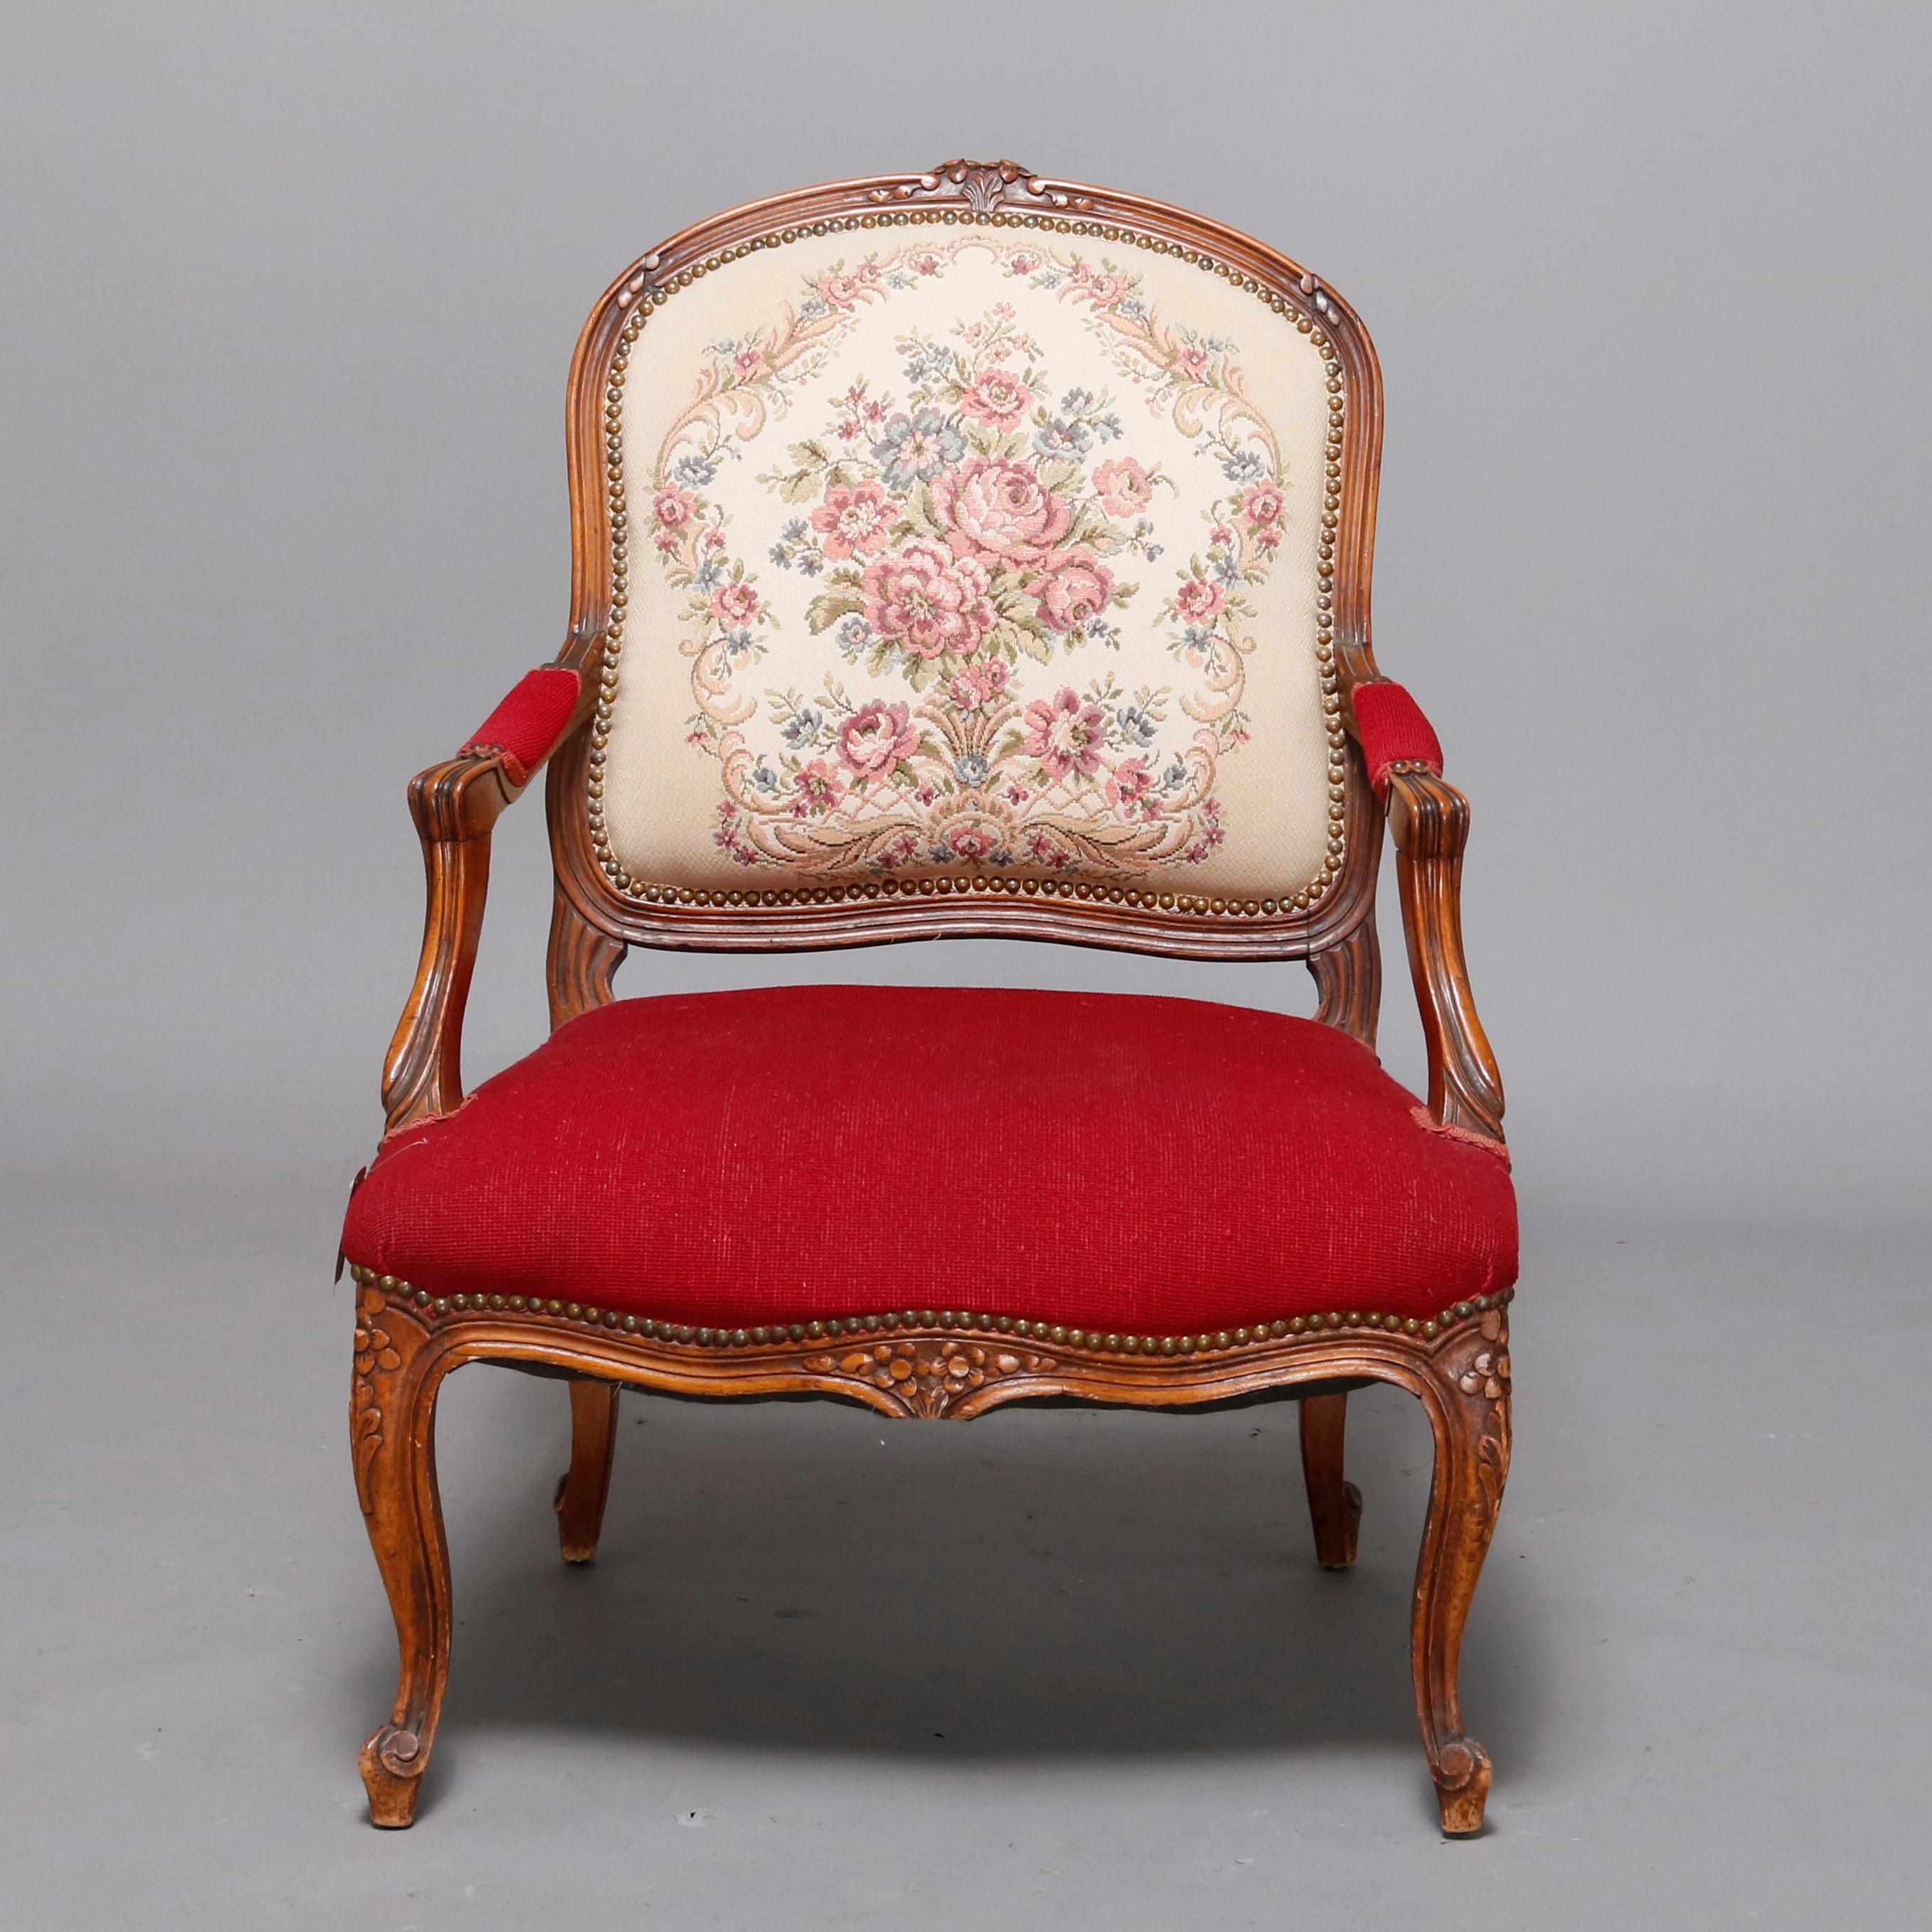 An antique French Louis XVI style armchair offers carved fruitwood frame with foliate crest surmounting medallion back with floral needlepoint upholstery surmounting covered arms and seat in complementing solid and raised on cabriole legs